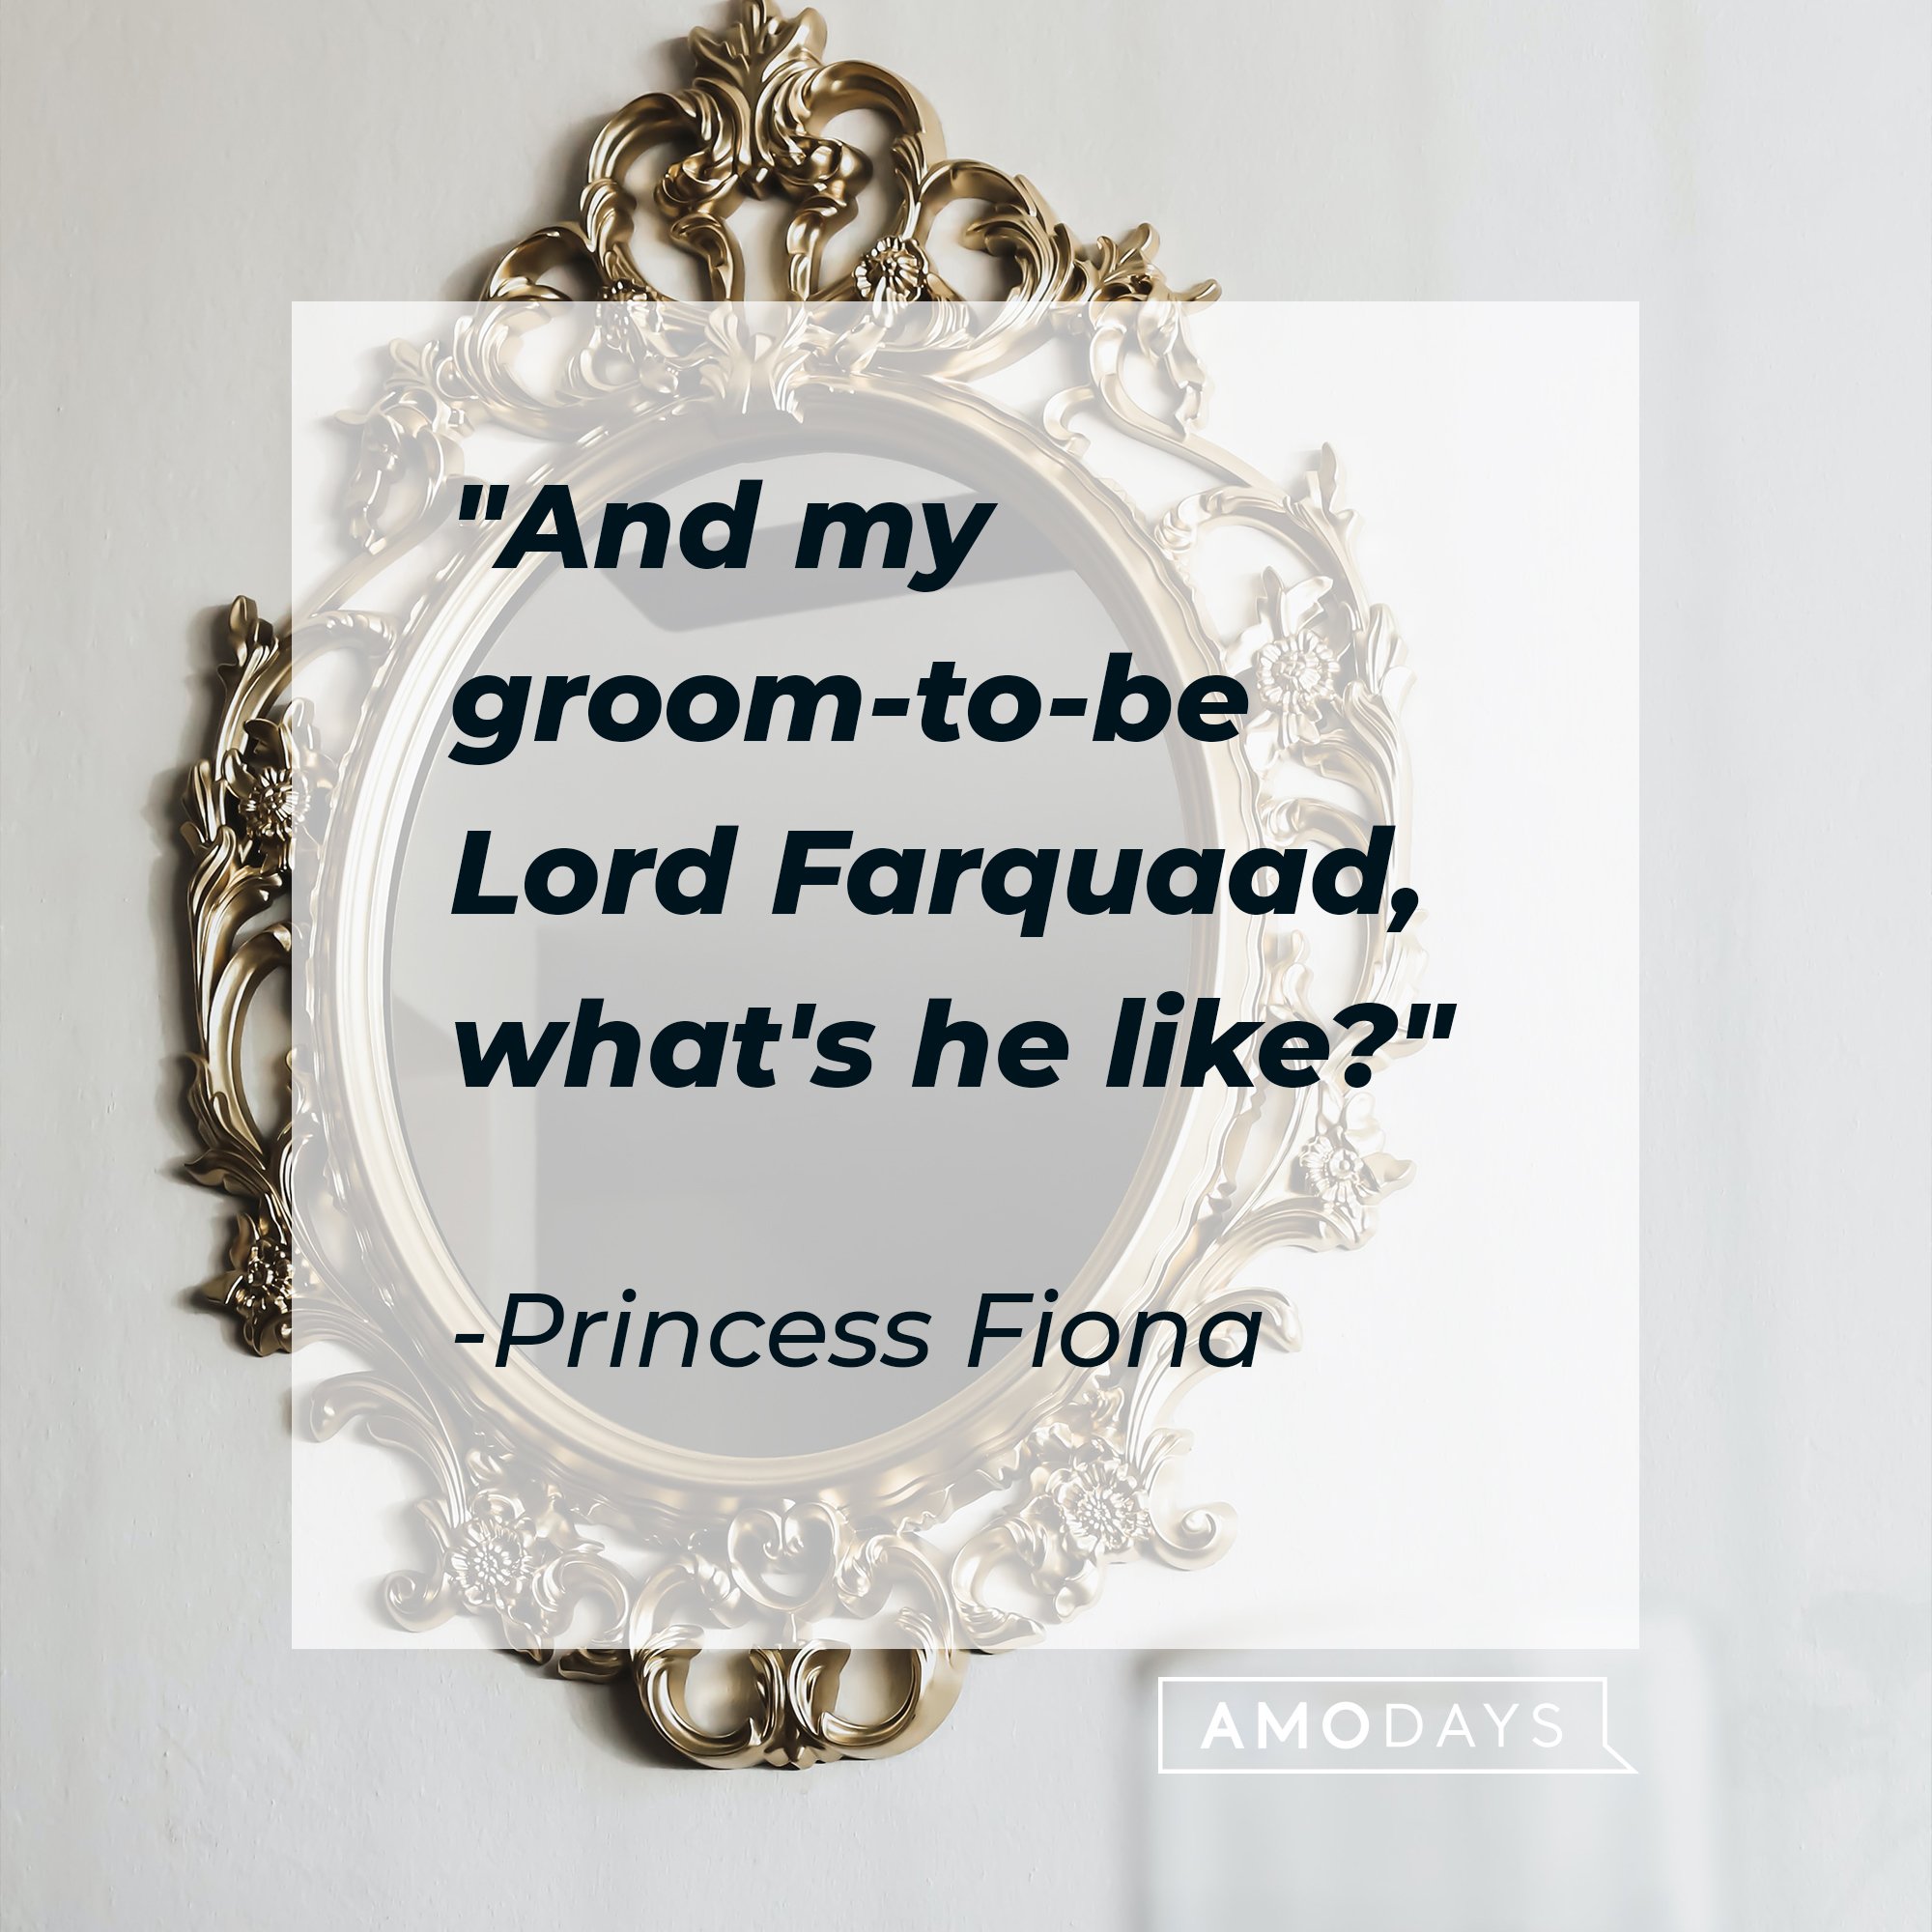 Princess Fiona's quote: "And my groom-to-be Lord Farquaad, what's he like?" | Image: AmoDays